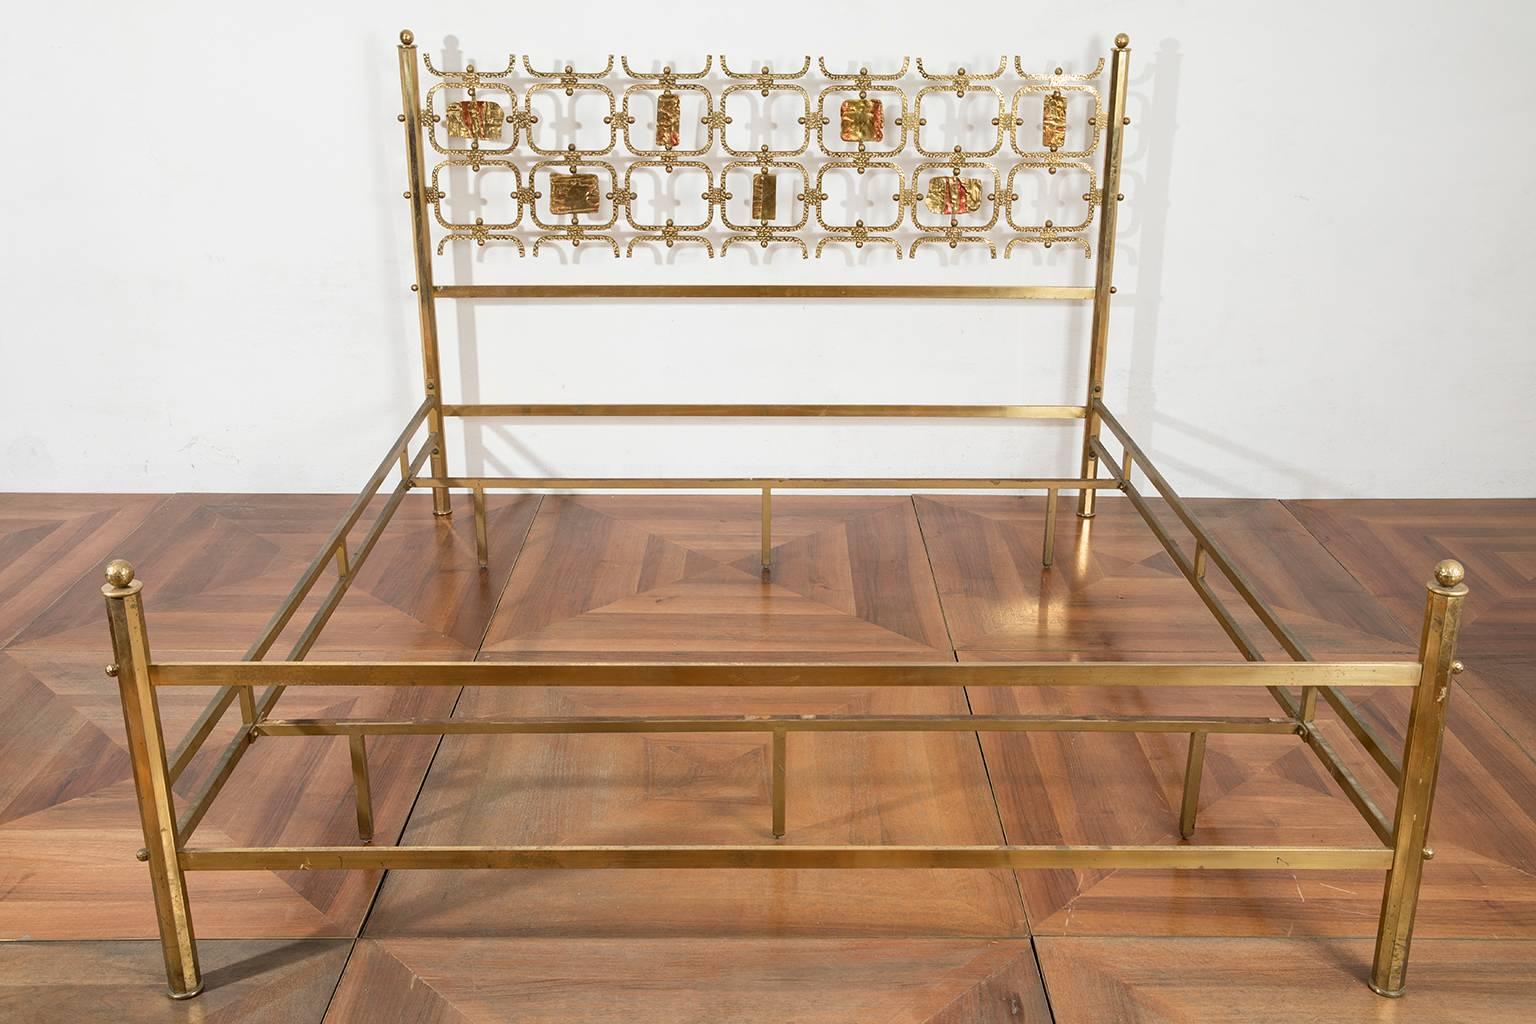 Stunning brass-plated steel bed designed by Osvaldo Borsani with seven hammered and enameled brass panels made by the sculptor Arnaldo Pomodoro.
Brass, enameled brass, brass-plated steel, painted steel,
circa 1964

Roberto Aloi, L'arredamento